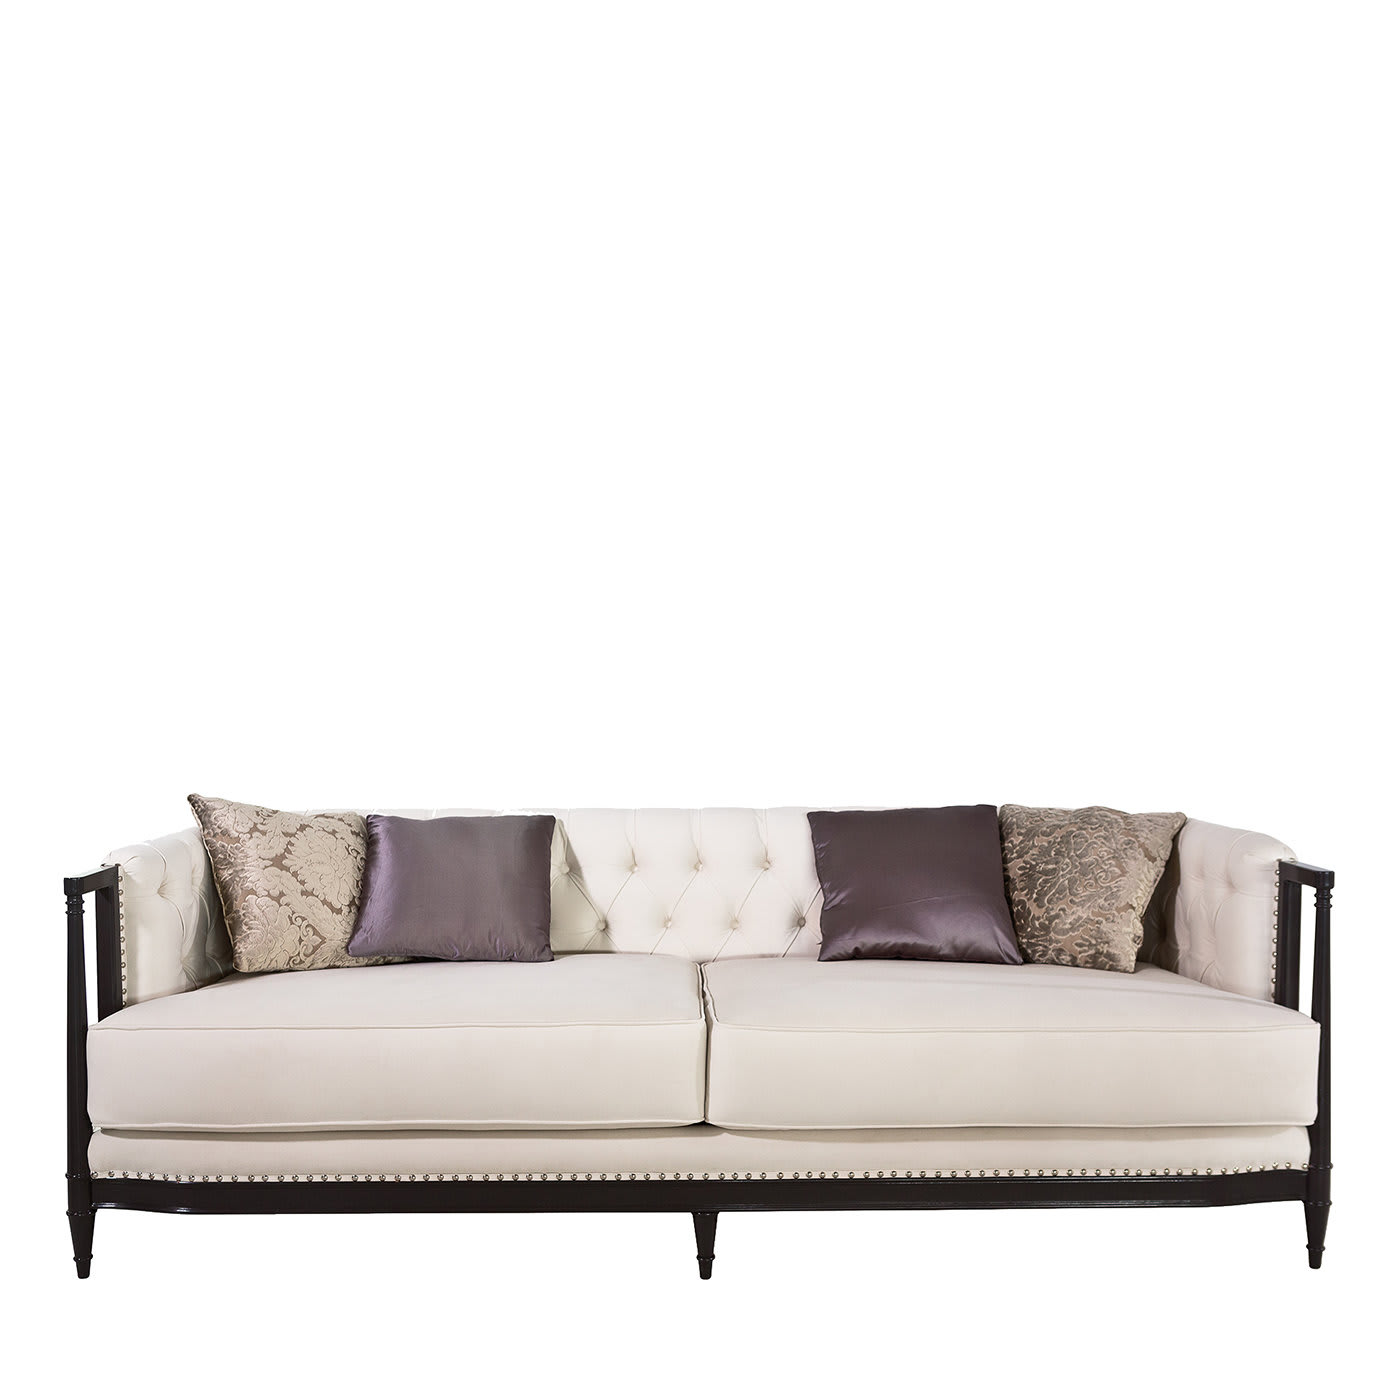 Colonial-Style Beige Sofa - Palmobili